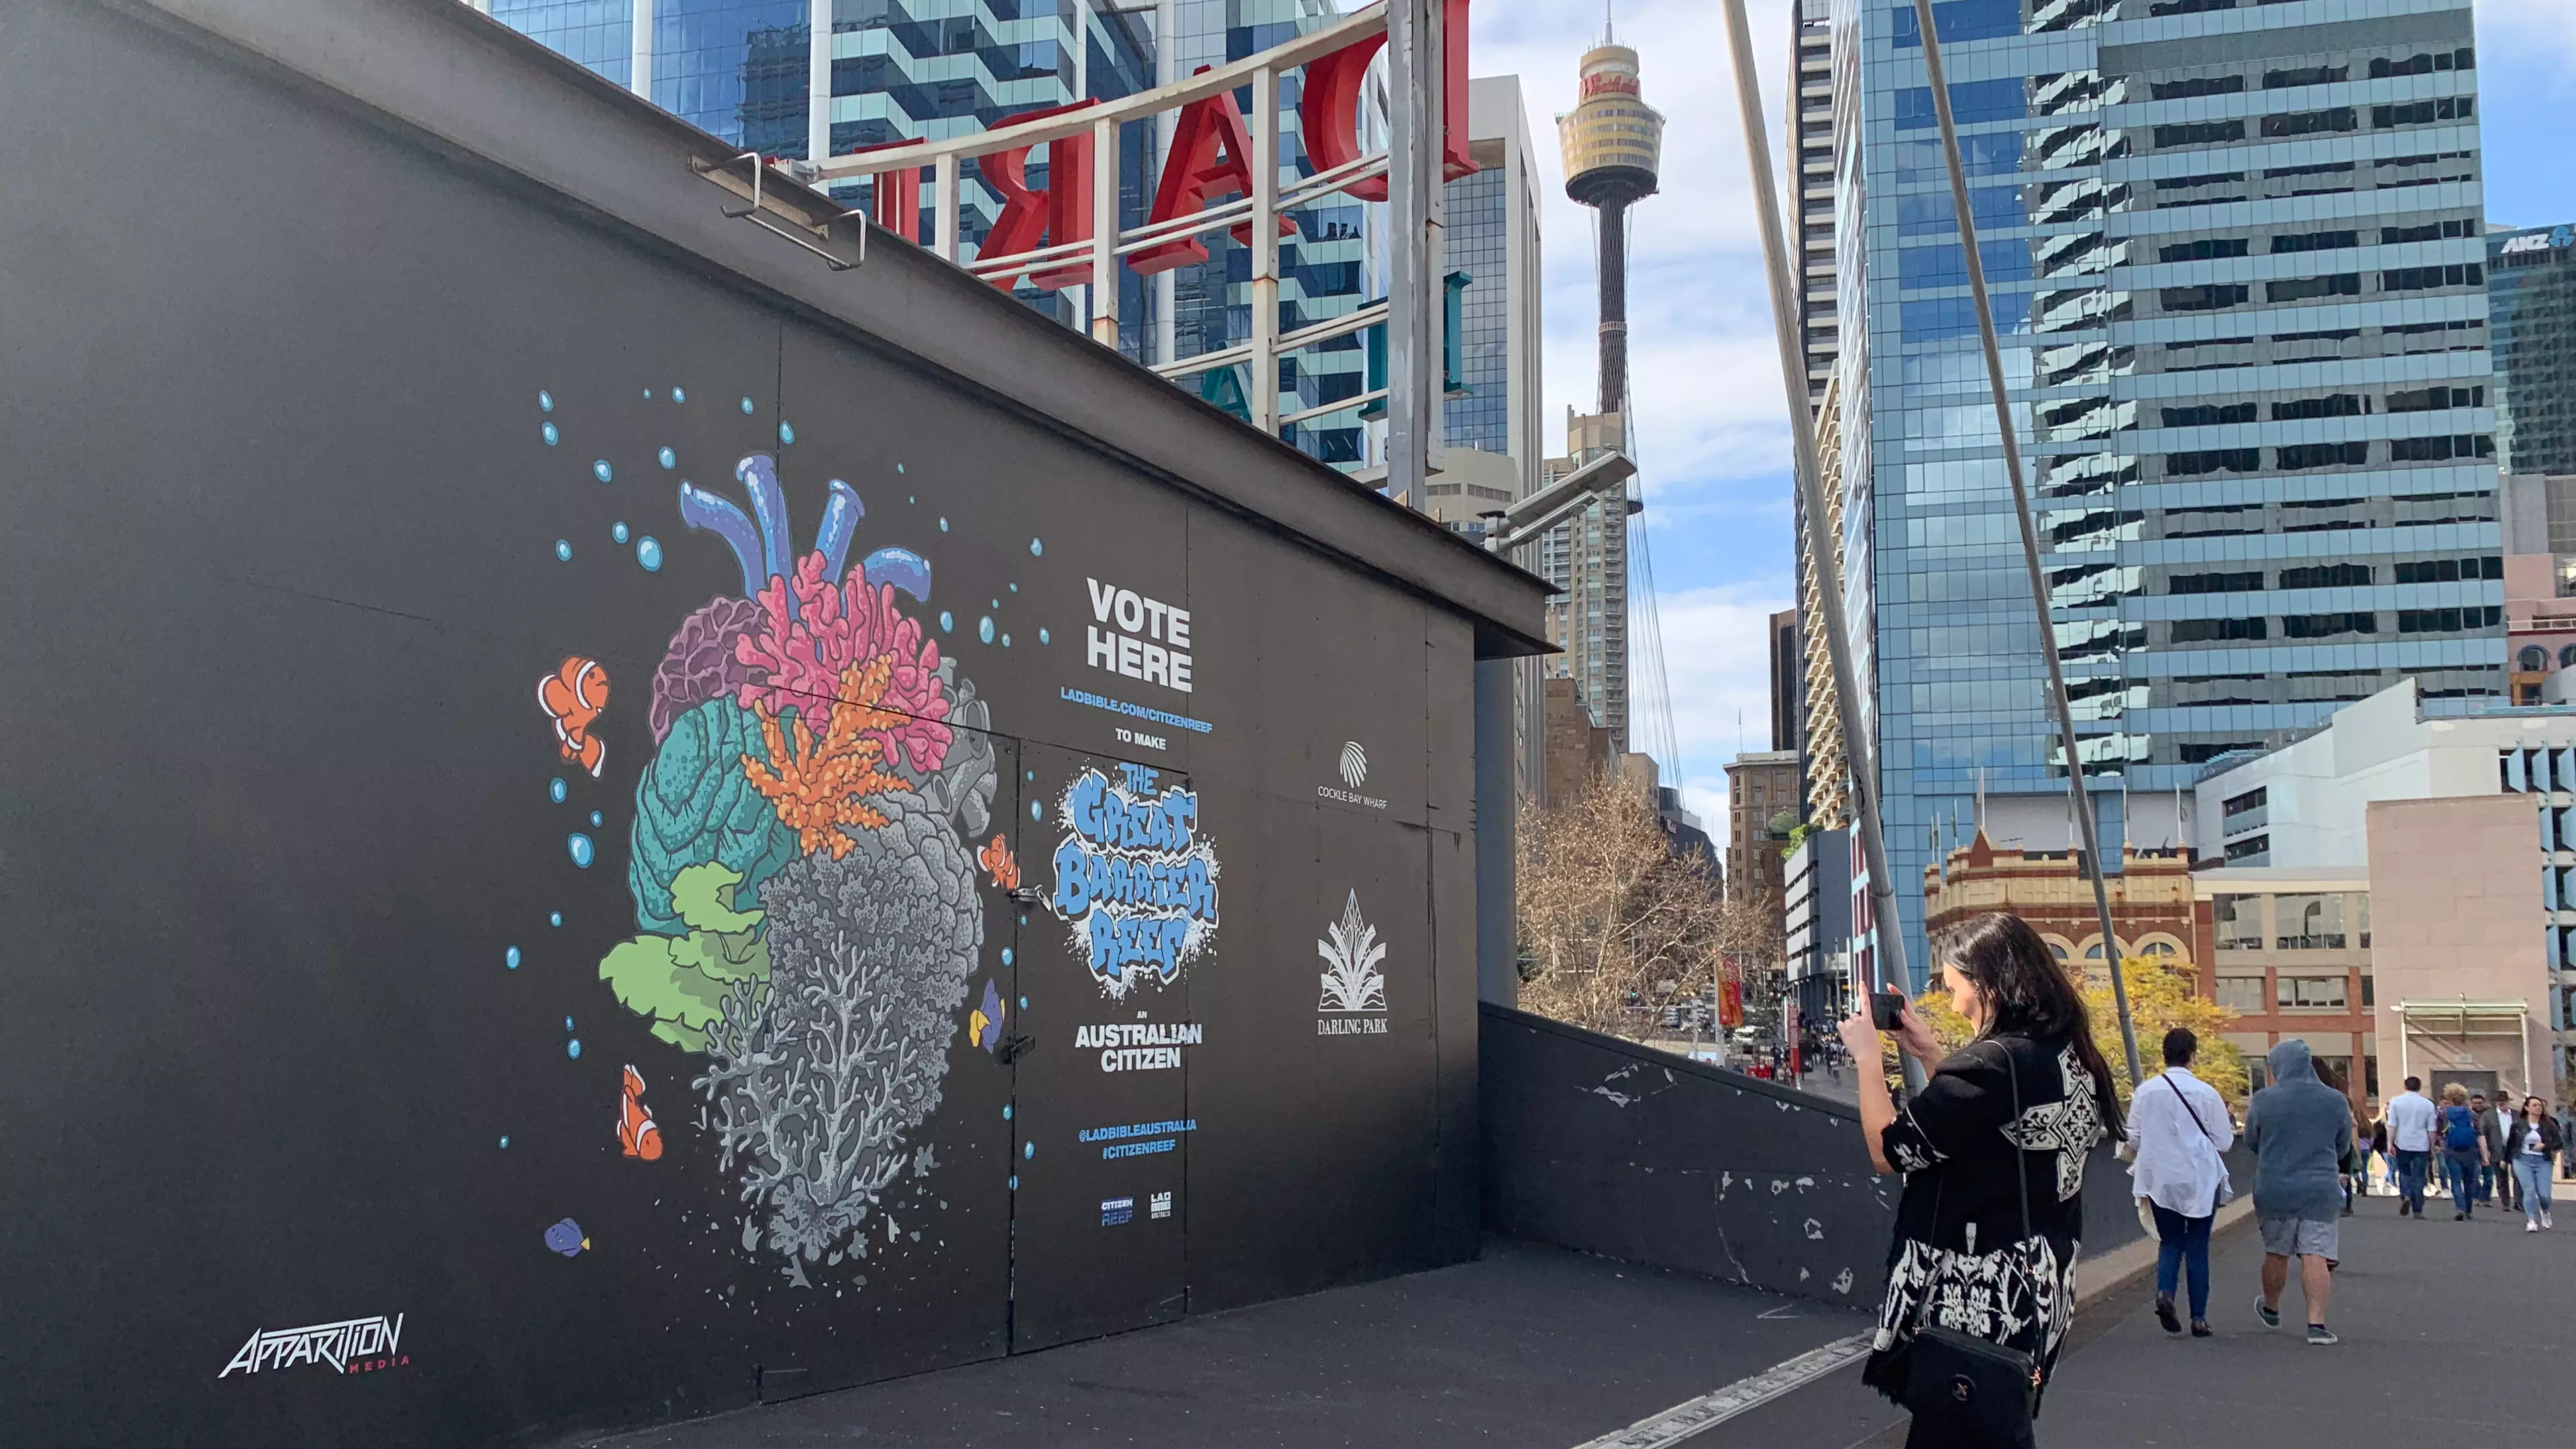 Street Art Has Appeared In Major Cities Demanding Citizenship For The Great Barrier Reef